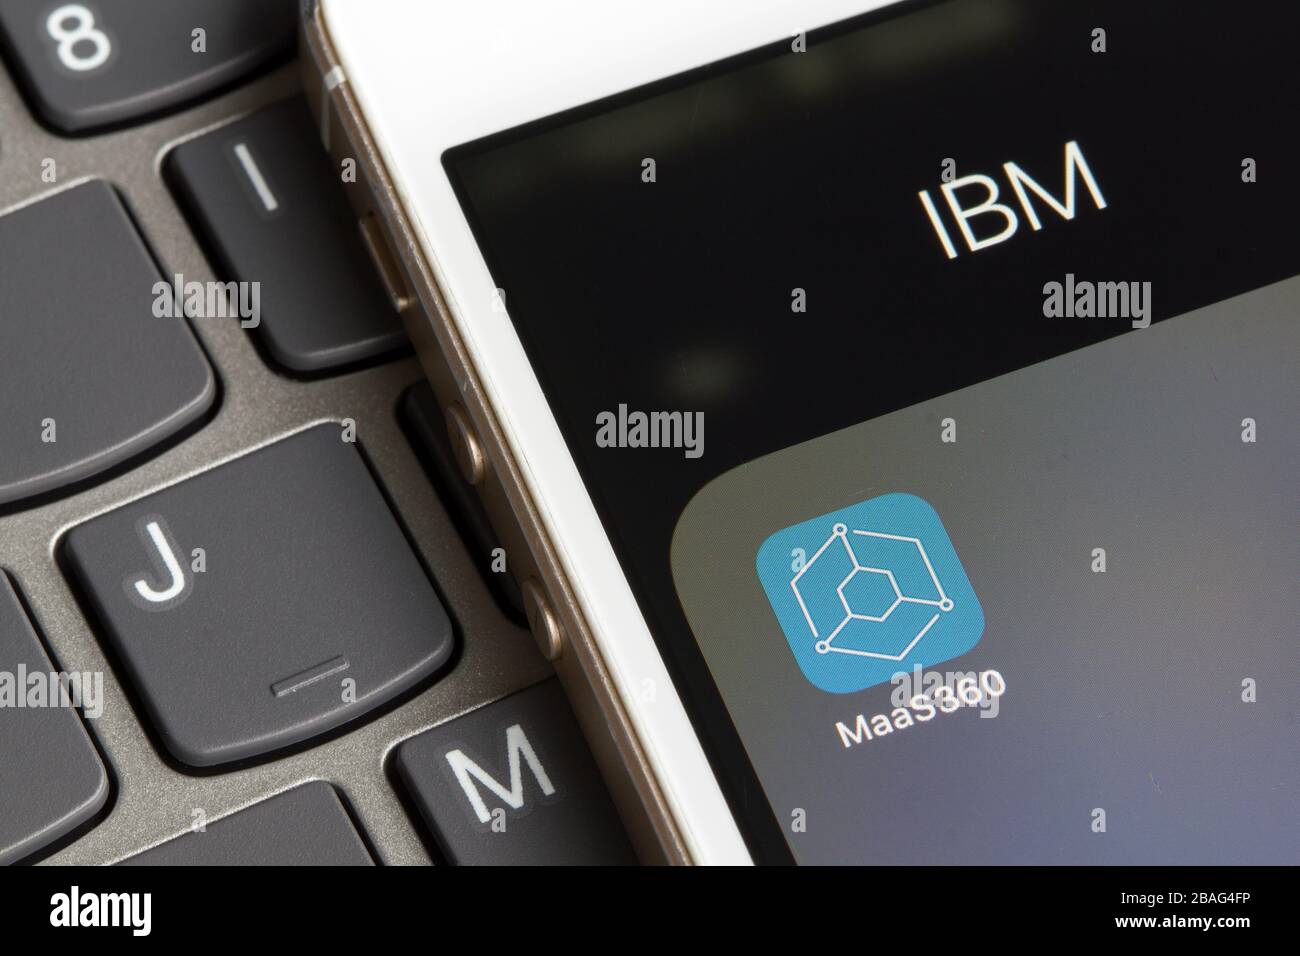 IBM MaaS360 mobile app icon closeup. MaaS360 with Watson is a cloud-based MDM software that securely enables mobile devices to access corporate data. Stock Photo